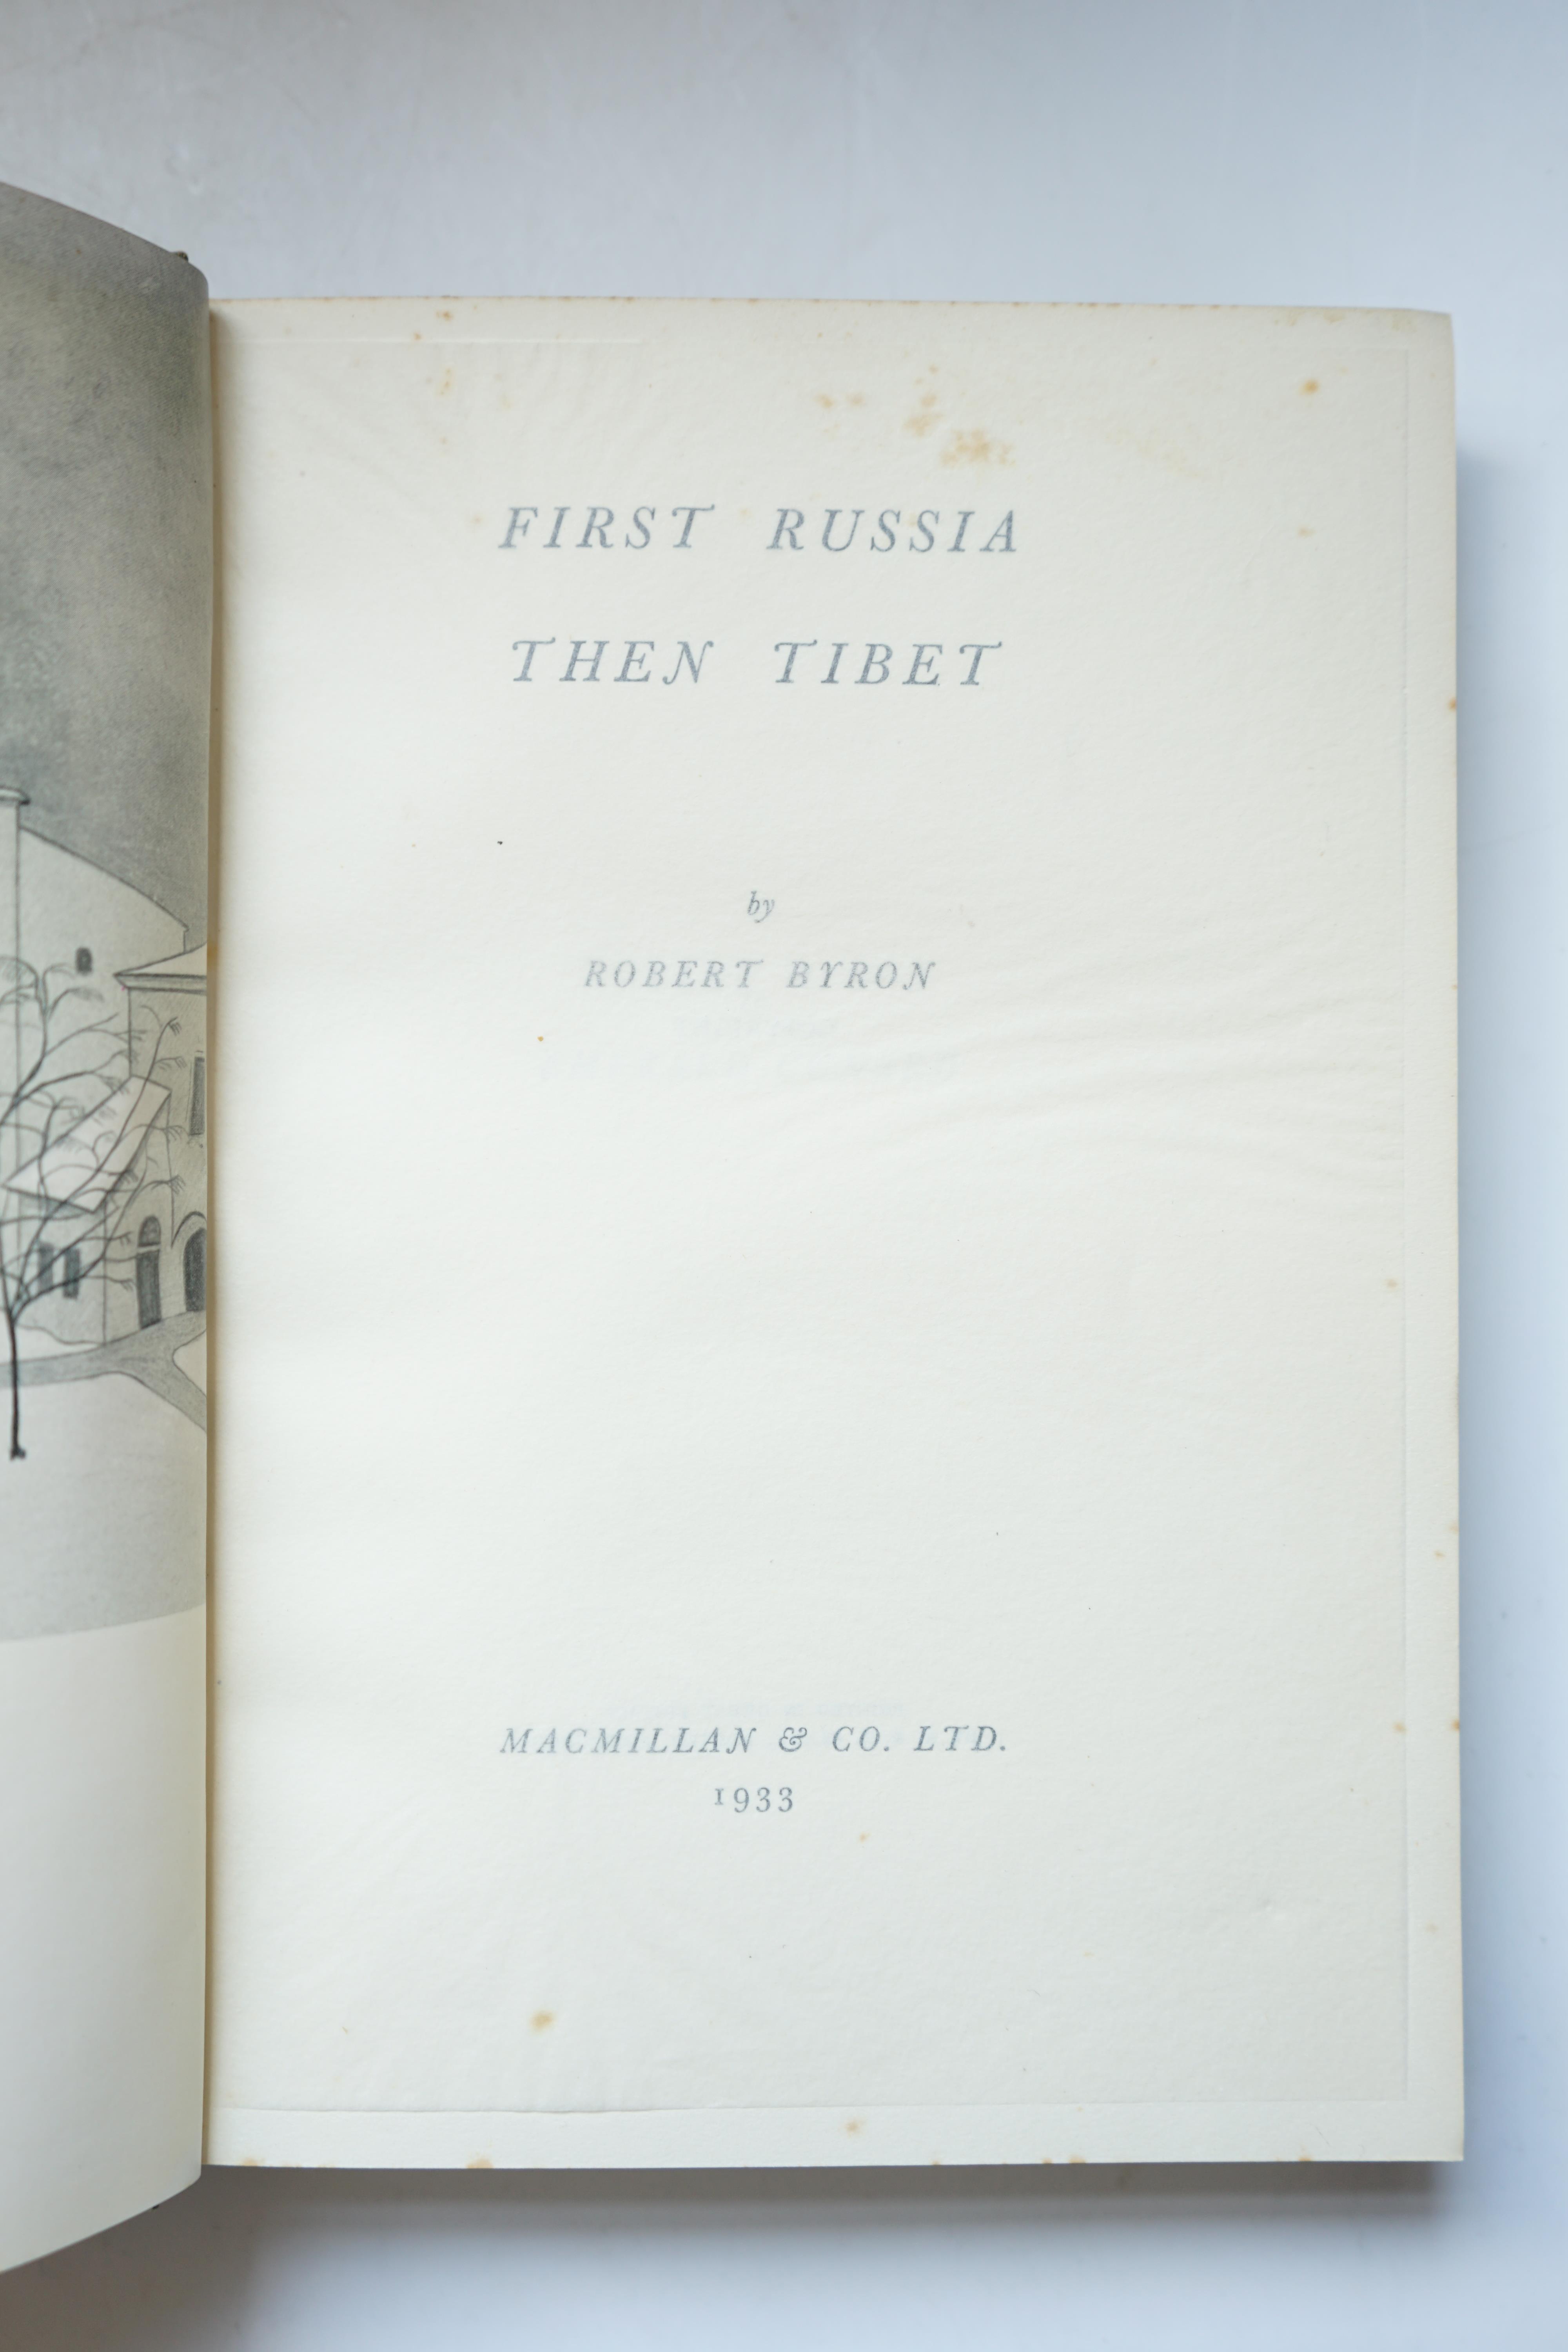 Byron, Robert - First Russia Then Tibet, 8vo, original green cloth, colour frontispiece and black and white plates, Macmillan & Co. Ltd, London, 1933